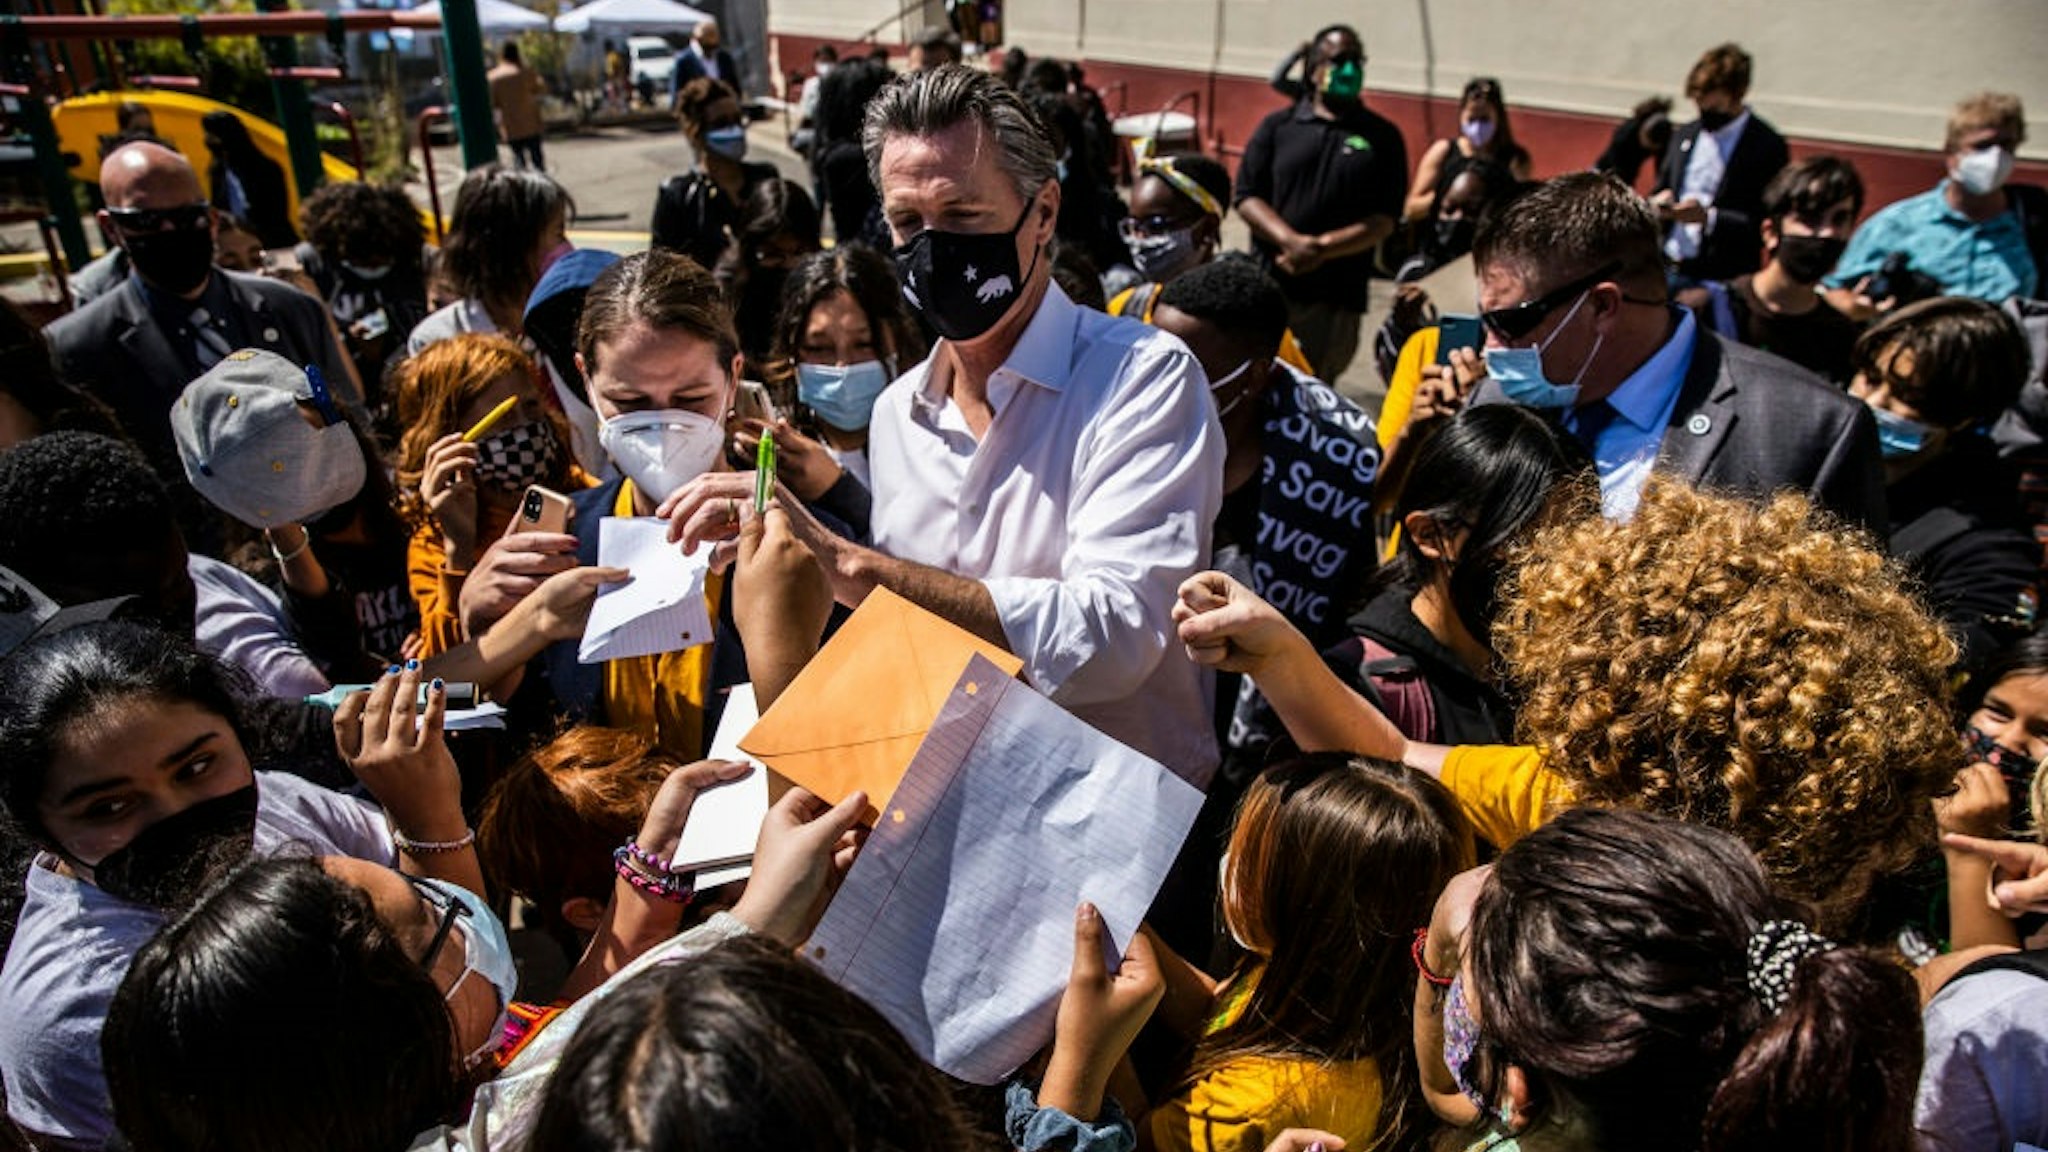 SAN FRANCISCO, CA - SEPTEMBER 15: California Governor Gavin Newsom signs autographs for students during a visit at Melrose Leadership Academy the day after surviving the gubernatorial recall election in Oakland, California on Wednesday, Sept. 15, 2021.